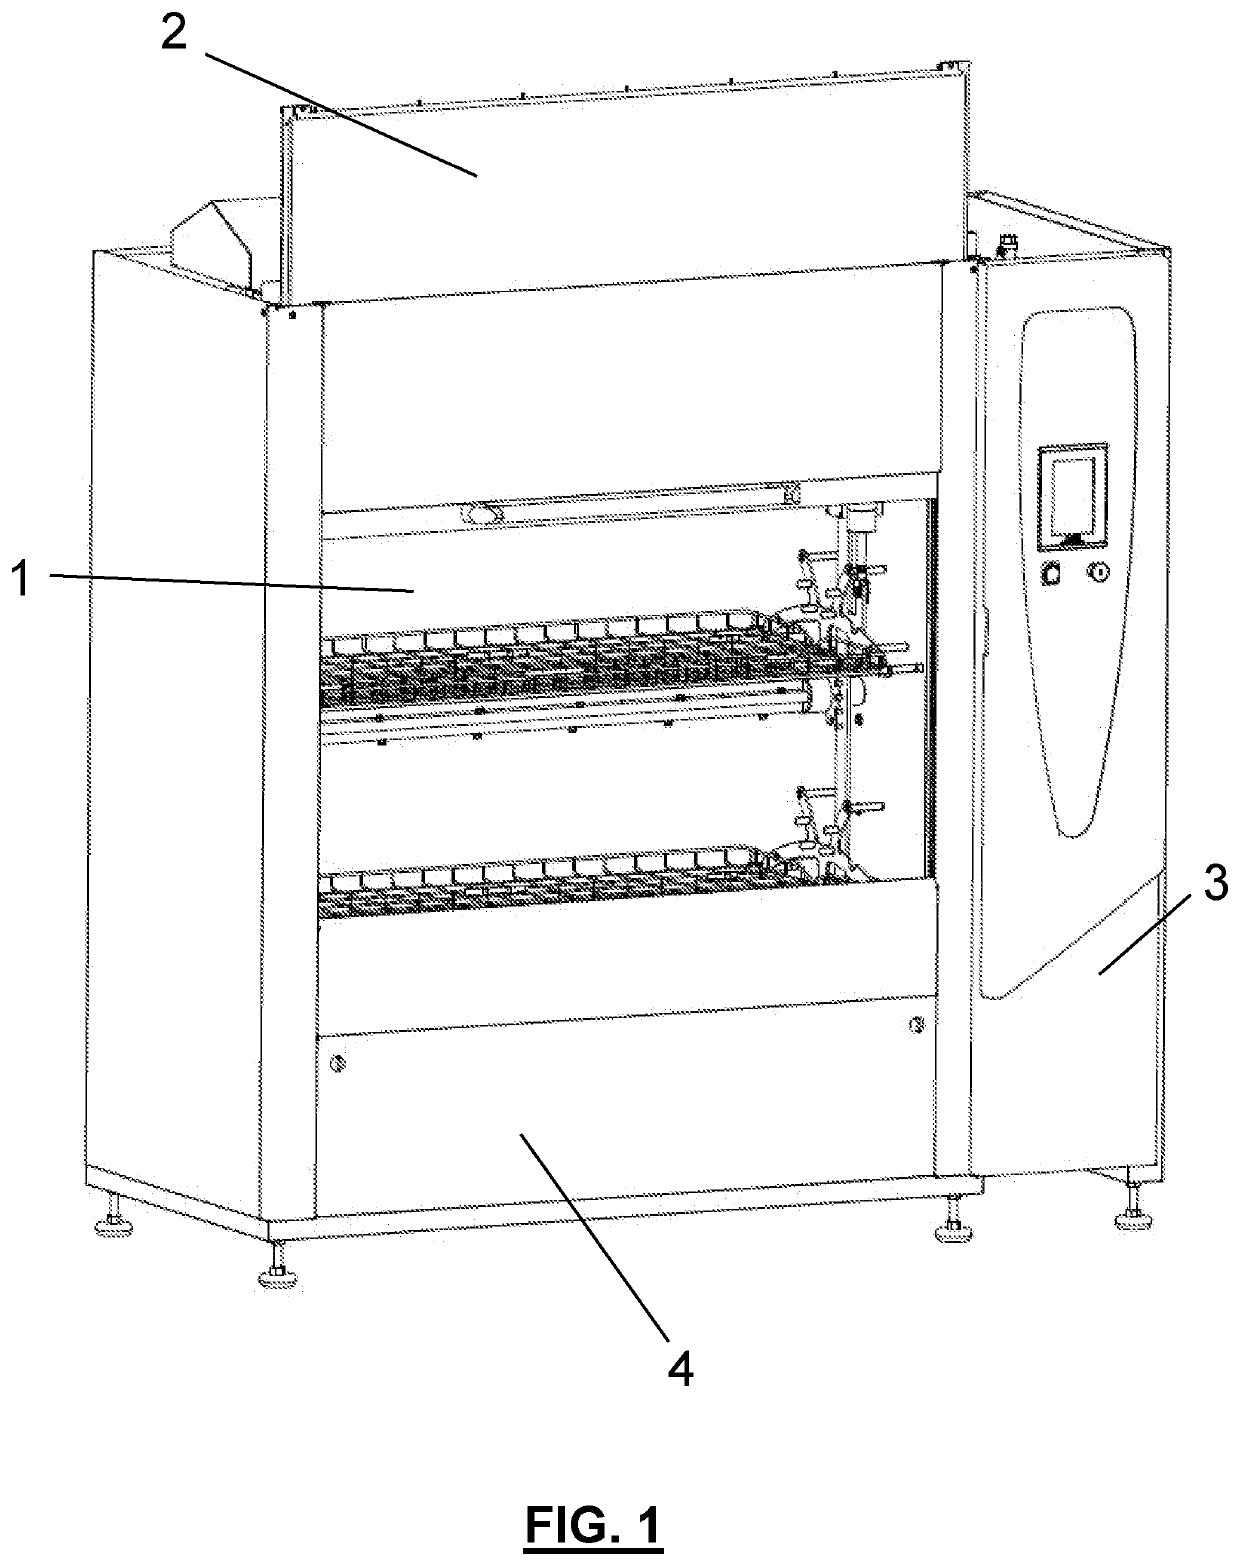 Washing machine adapted for cages and accessories used in the field of research on laboratory animals